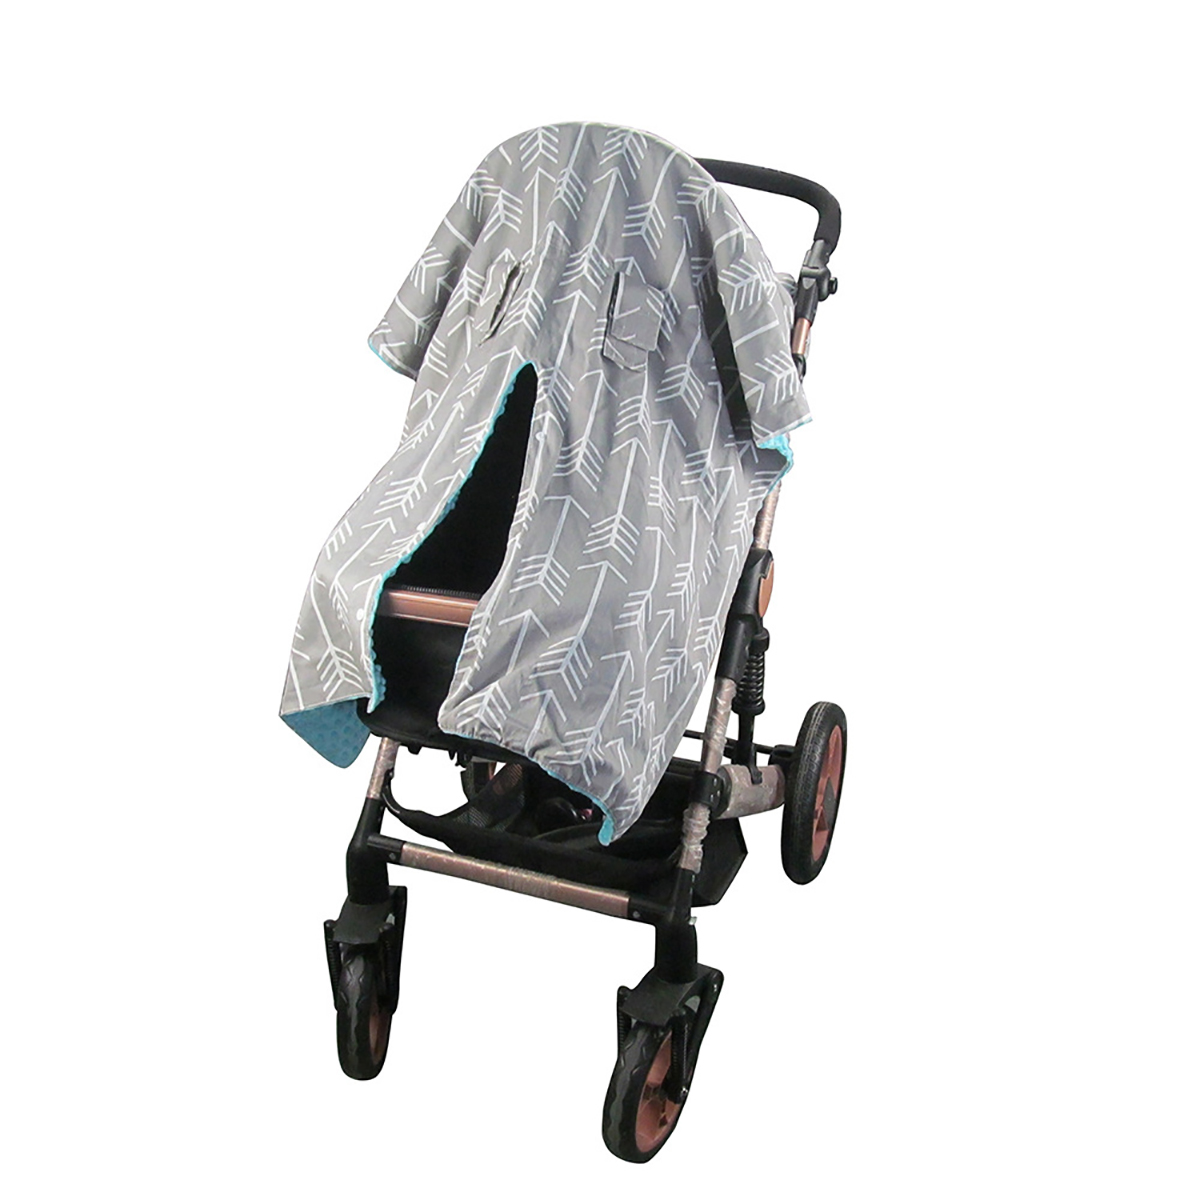 4-IN-1-Thickened-Multi-Use-Stroller-Cart-Seat-Cover-Breastfeeding-Nursing-Scarf-Snug-Warm-Breathable-1810349-6